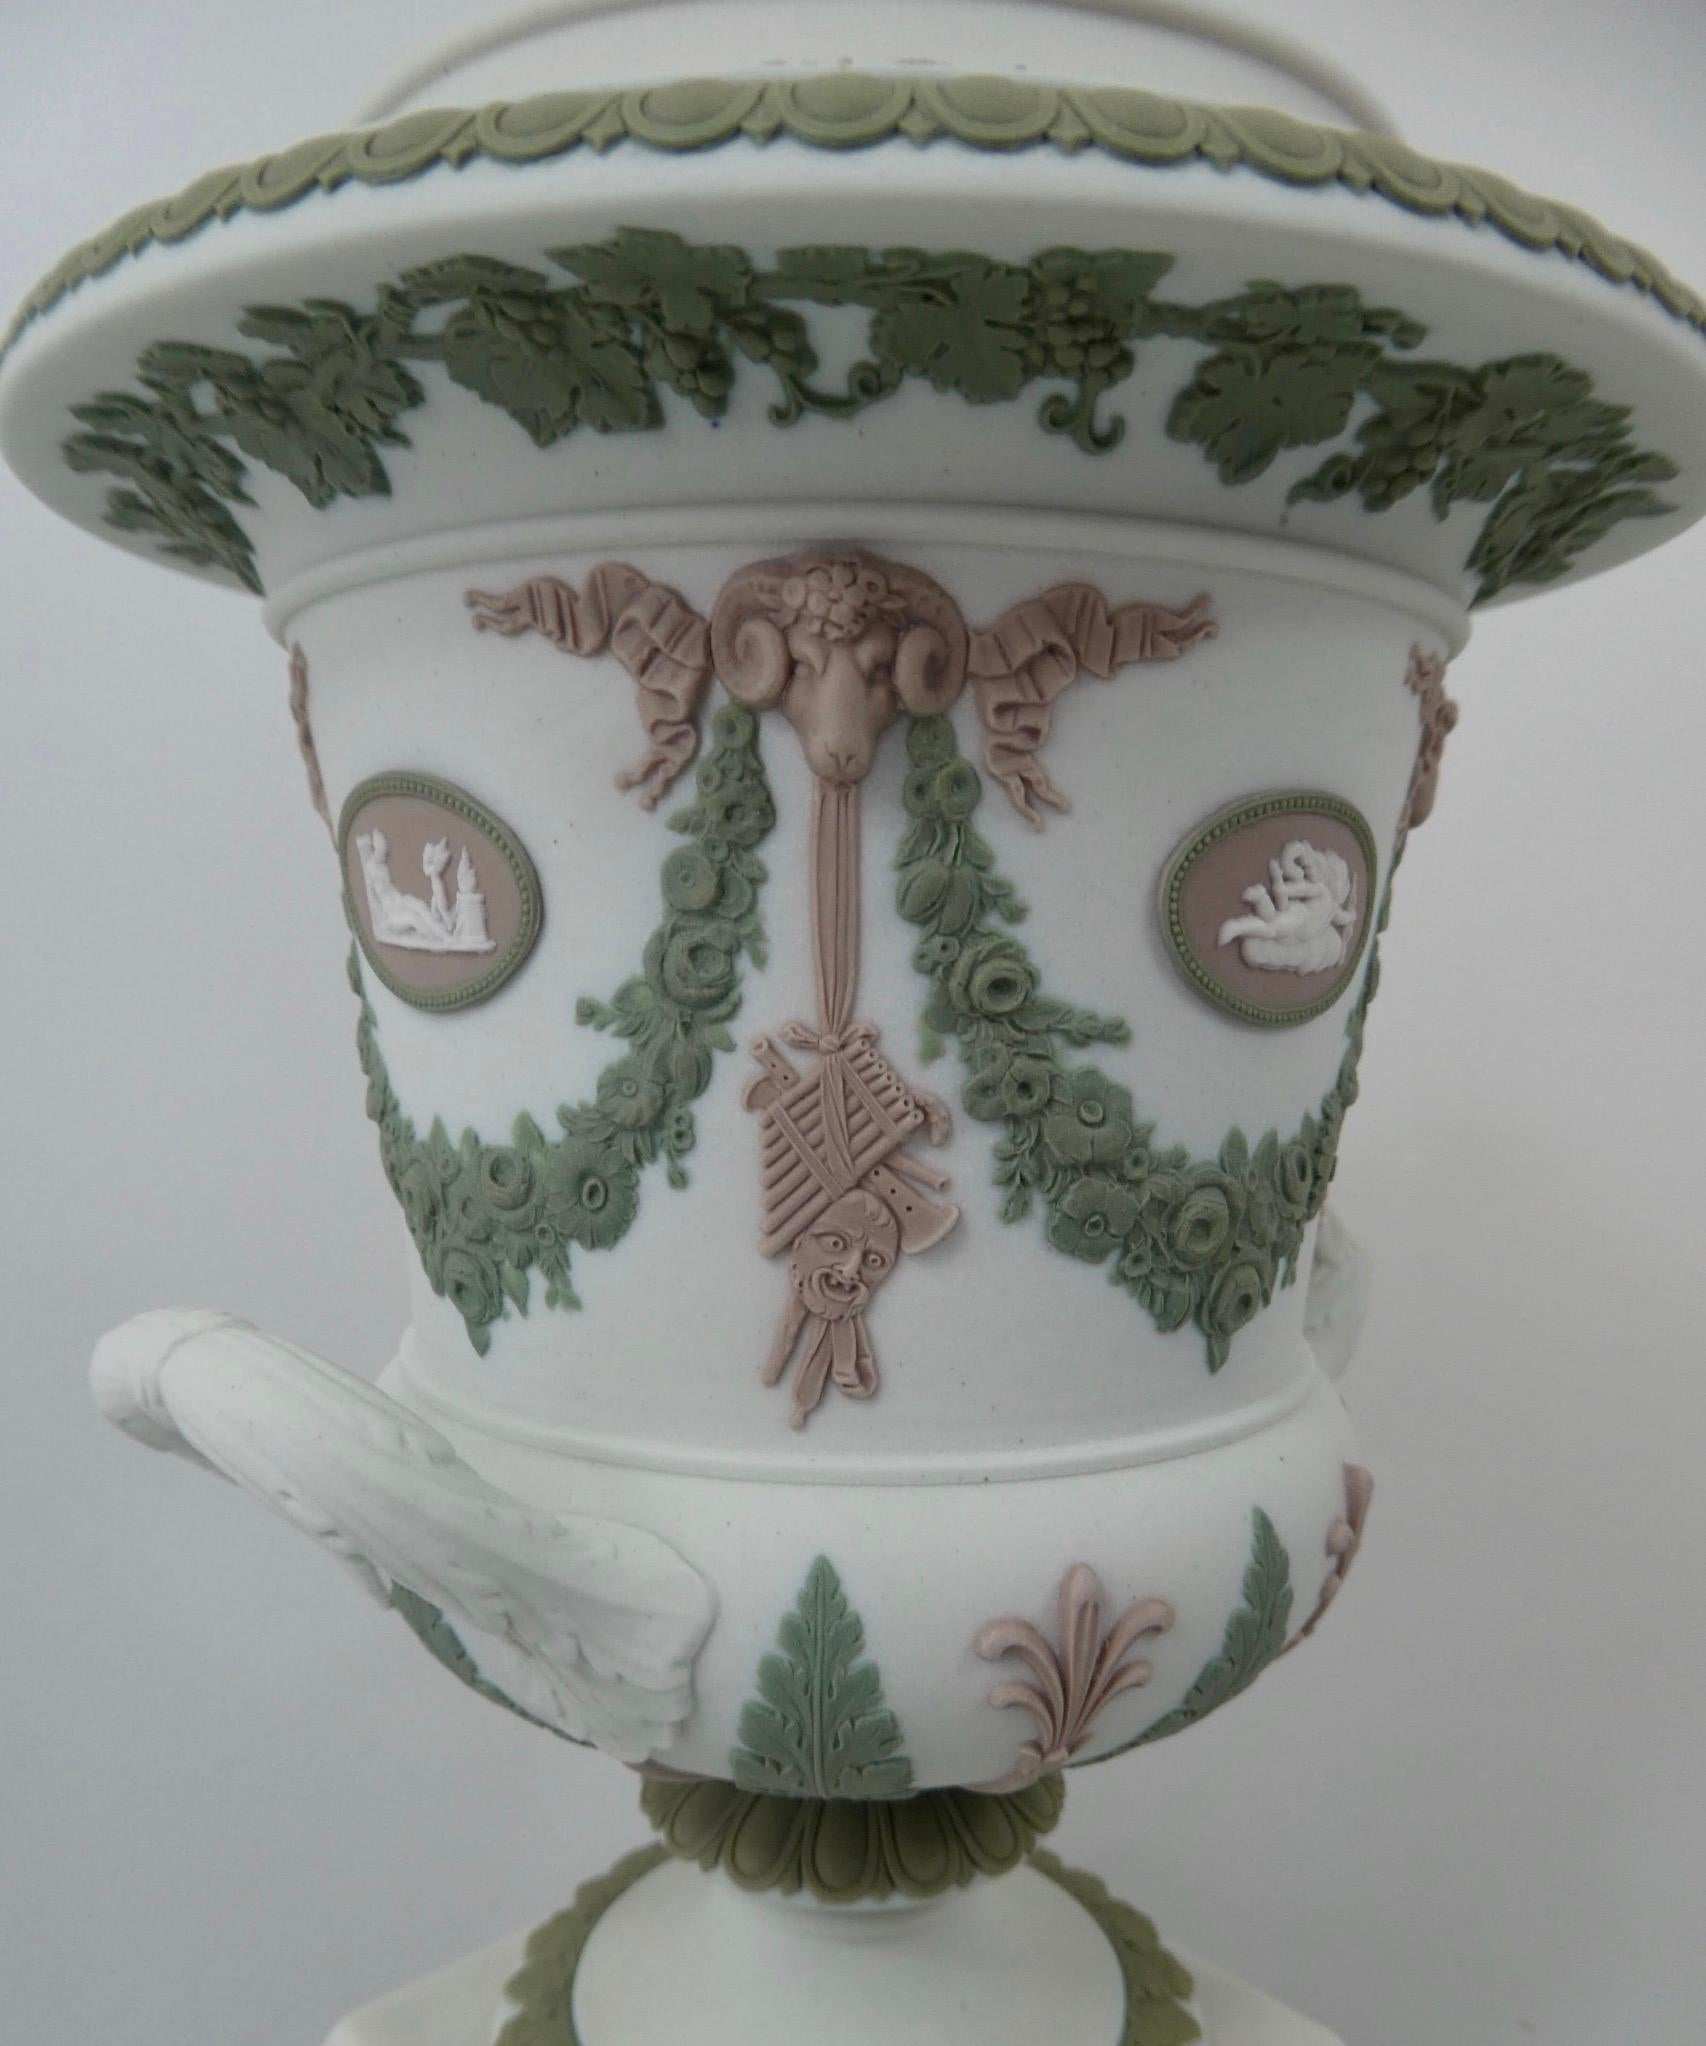 19th Century Wedgwood ‘Three colour’ Vase and Cover, circa 1900